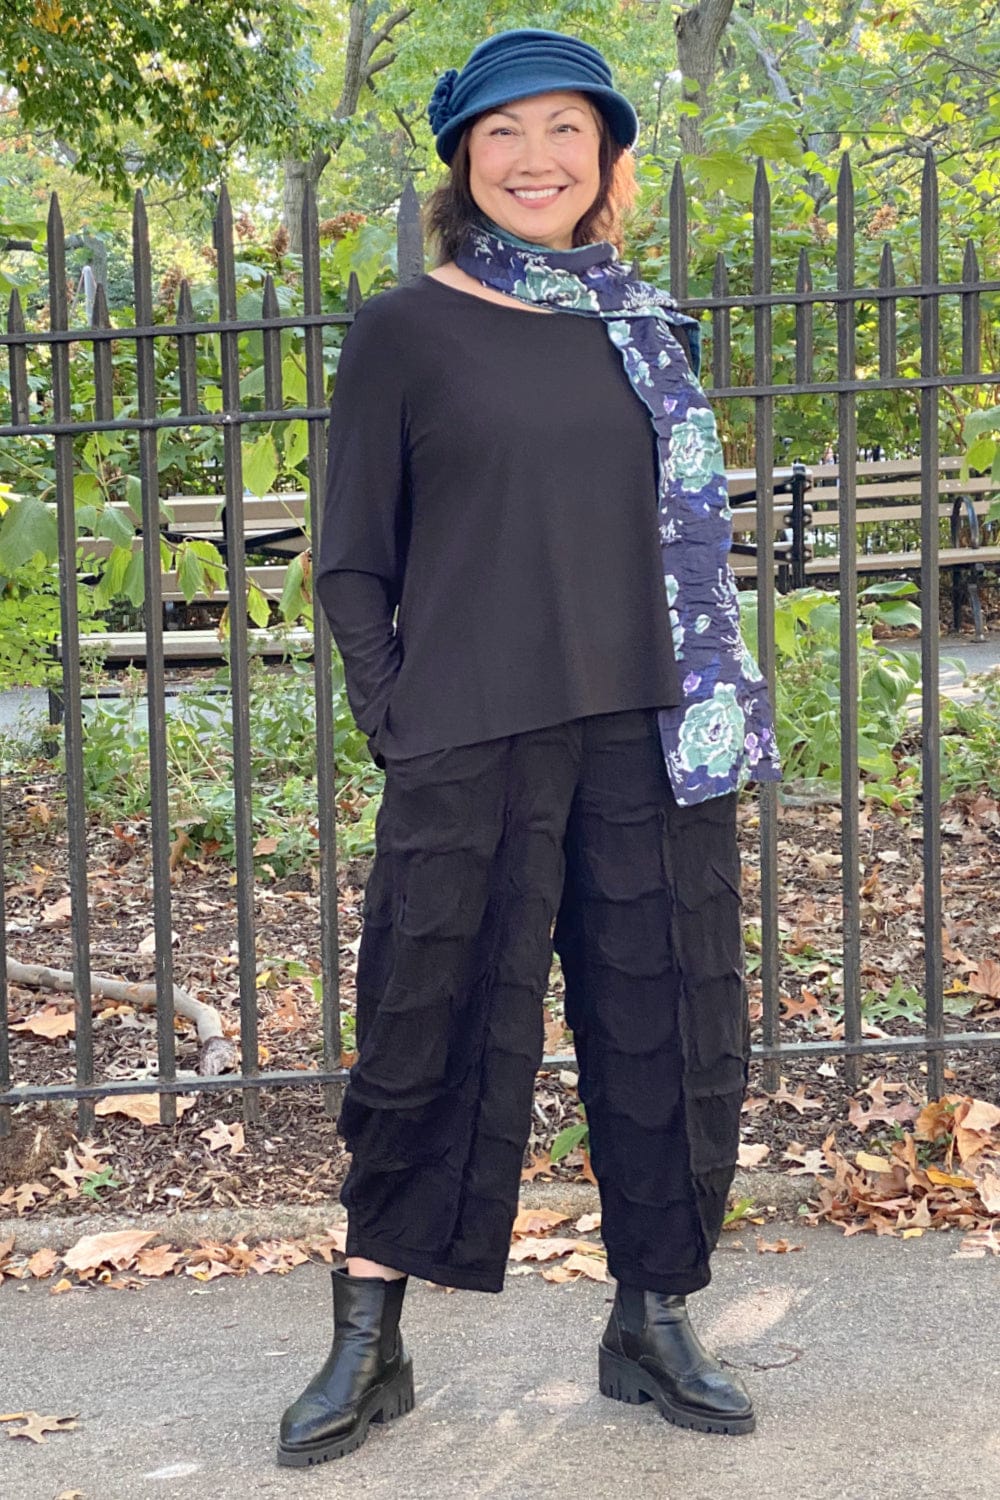 Women's Textured loose fit black pants styled with a blue hat and scarf.